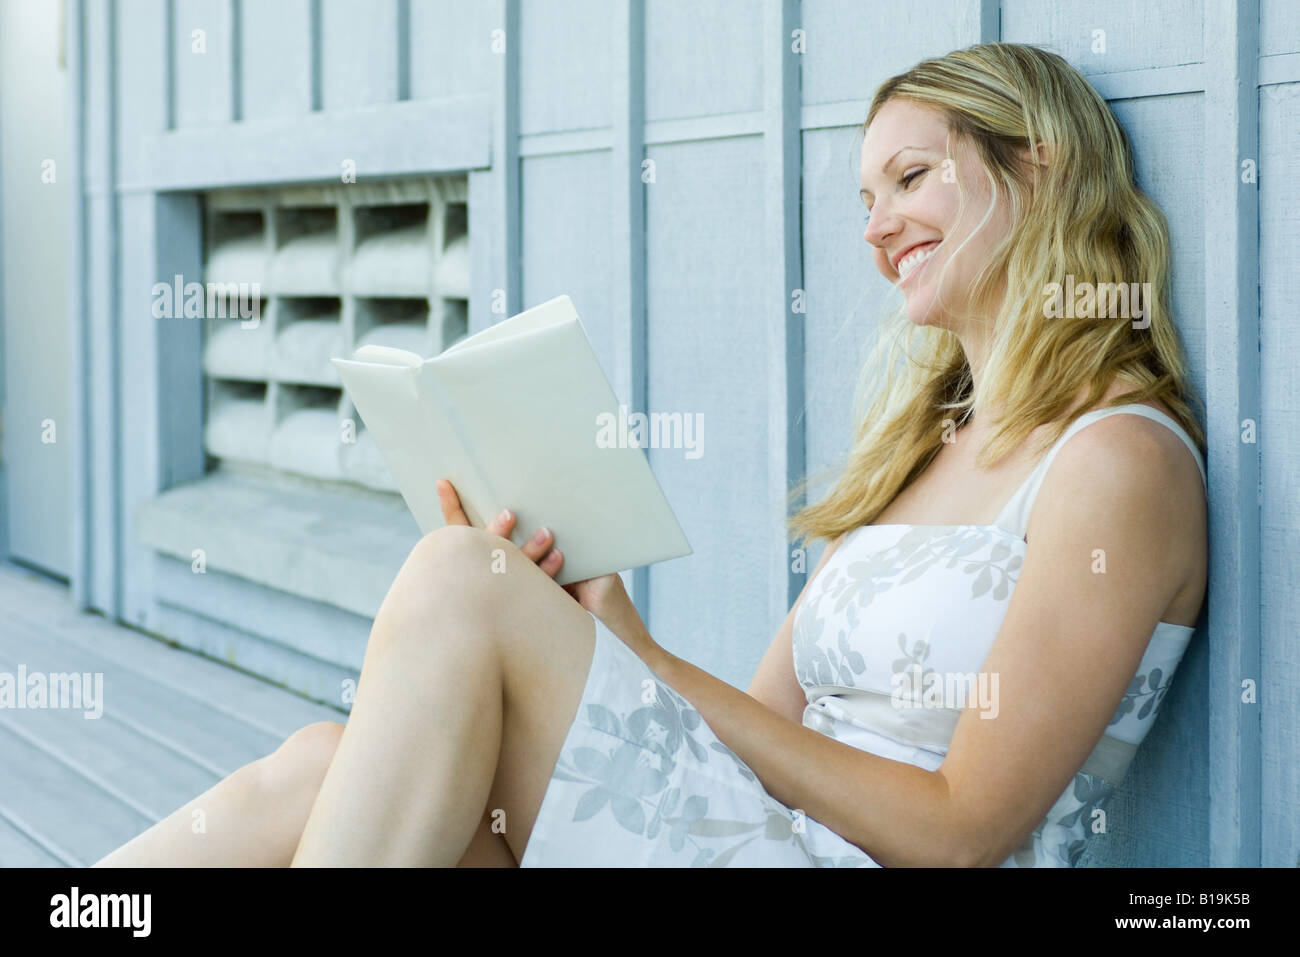 Young woman sitting outdoors, reading book, smiling Stock Photo